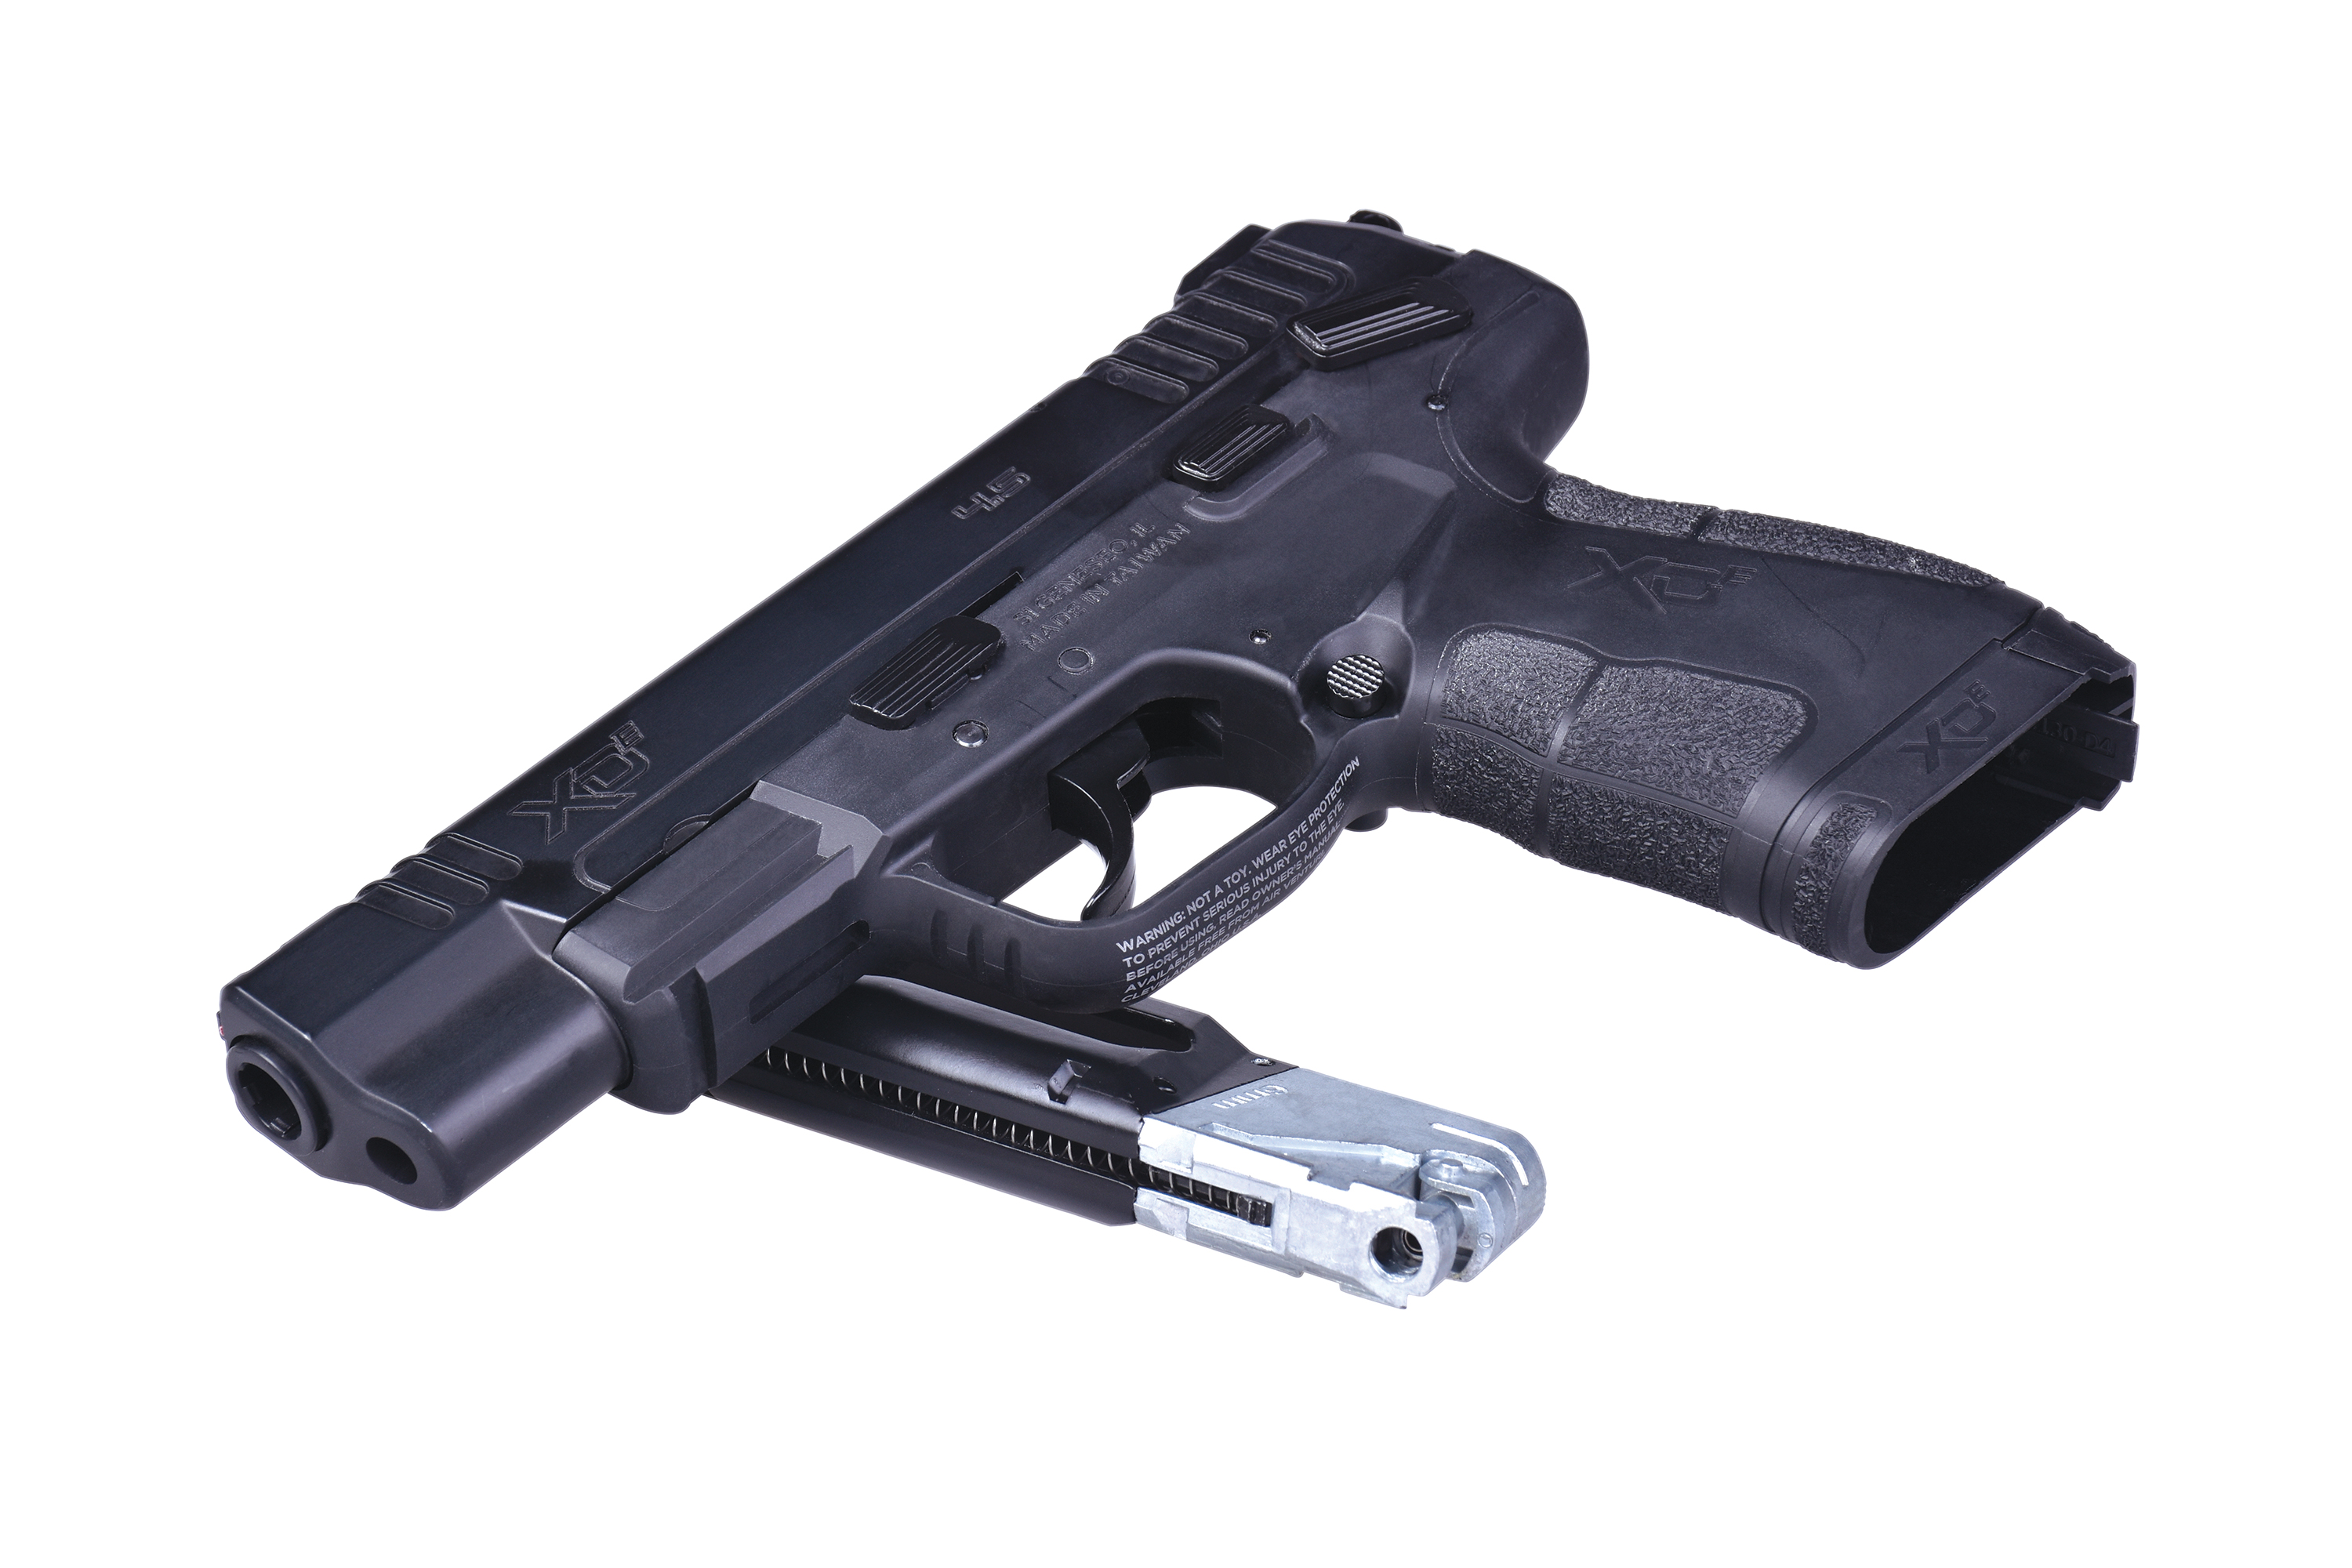 Springfield XDE 4,5'' Schwarz 6mm - Airsoft Co2 BlowBack